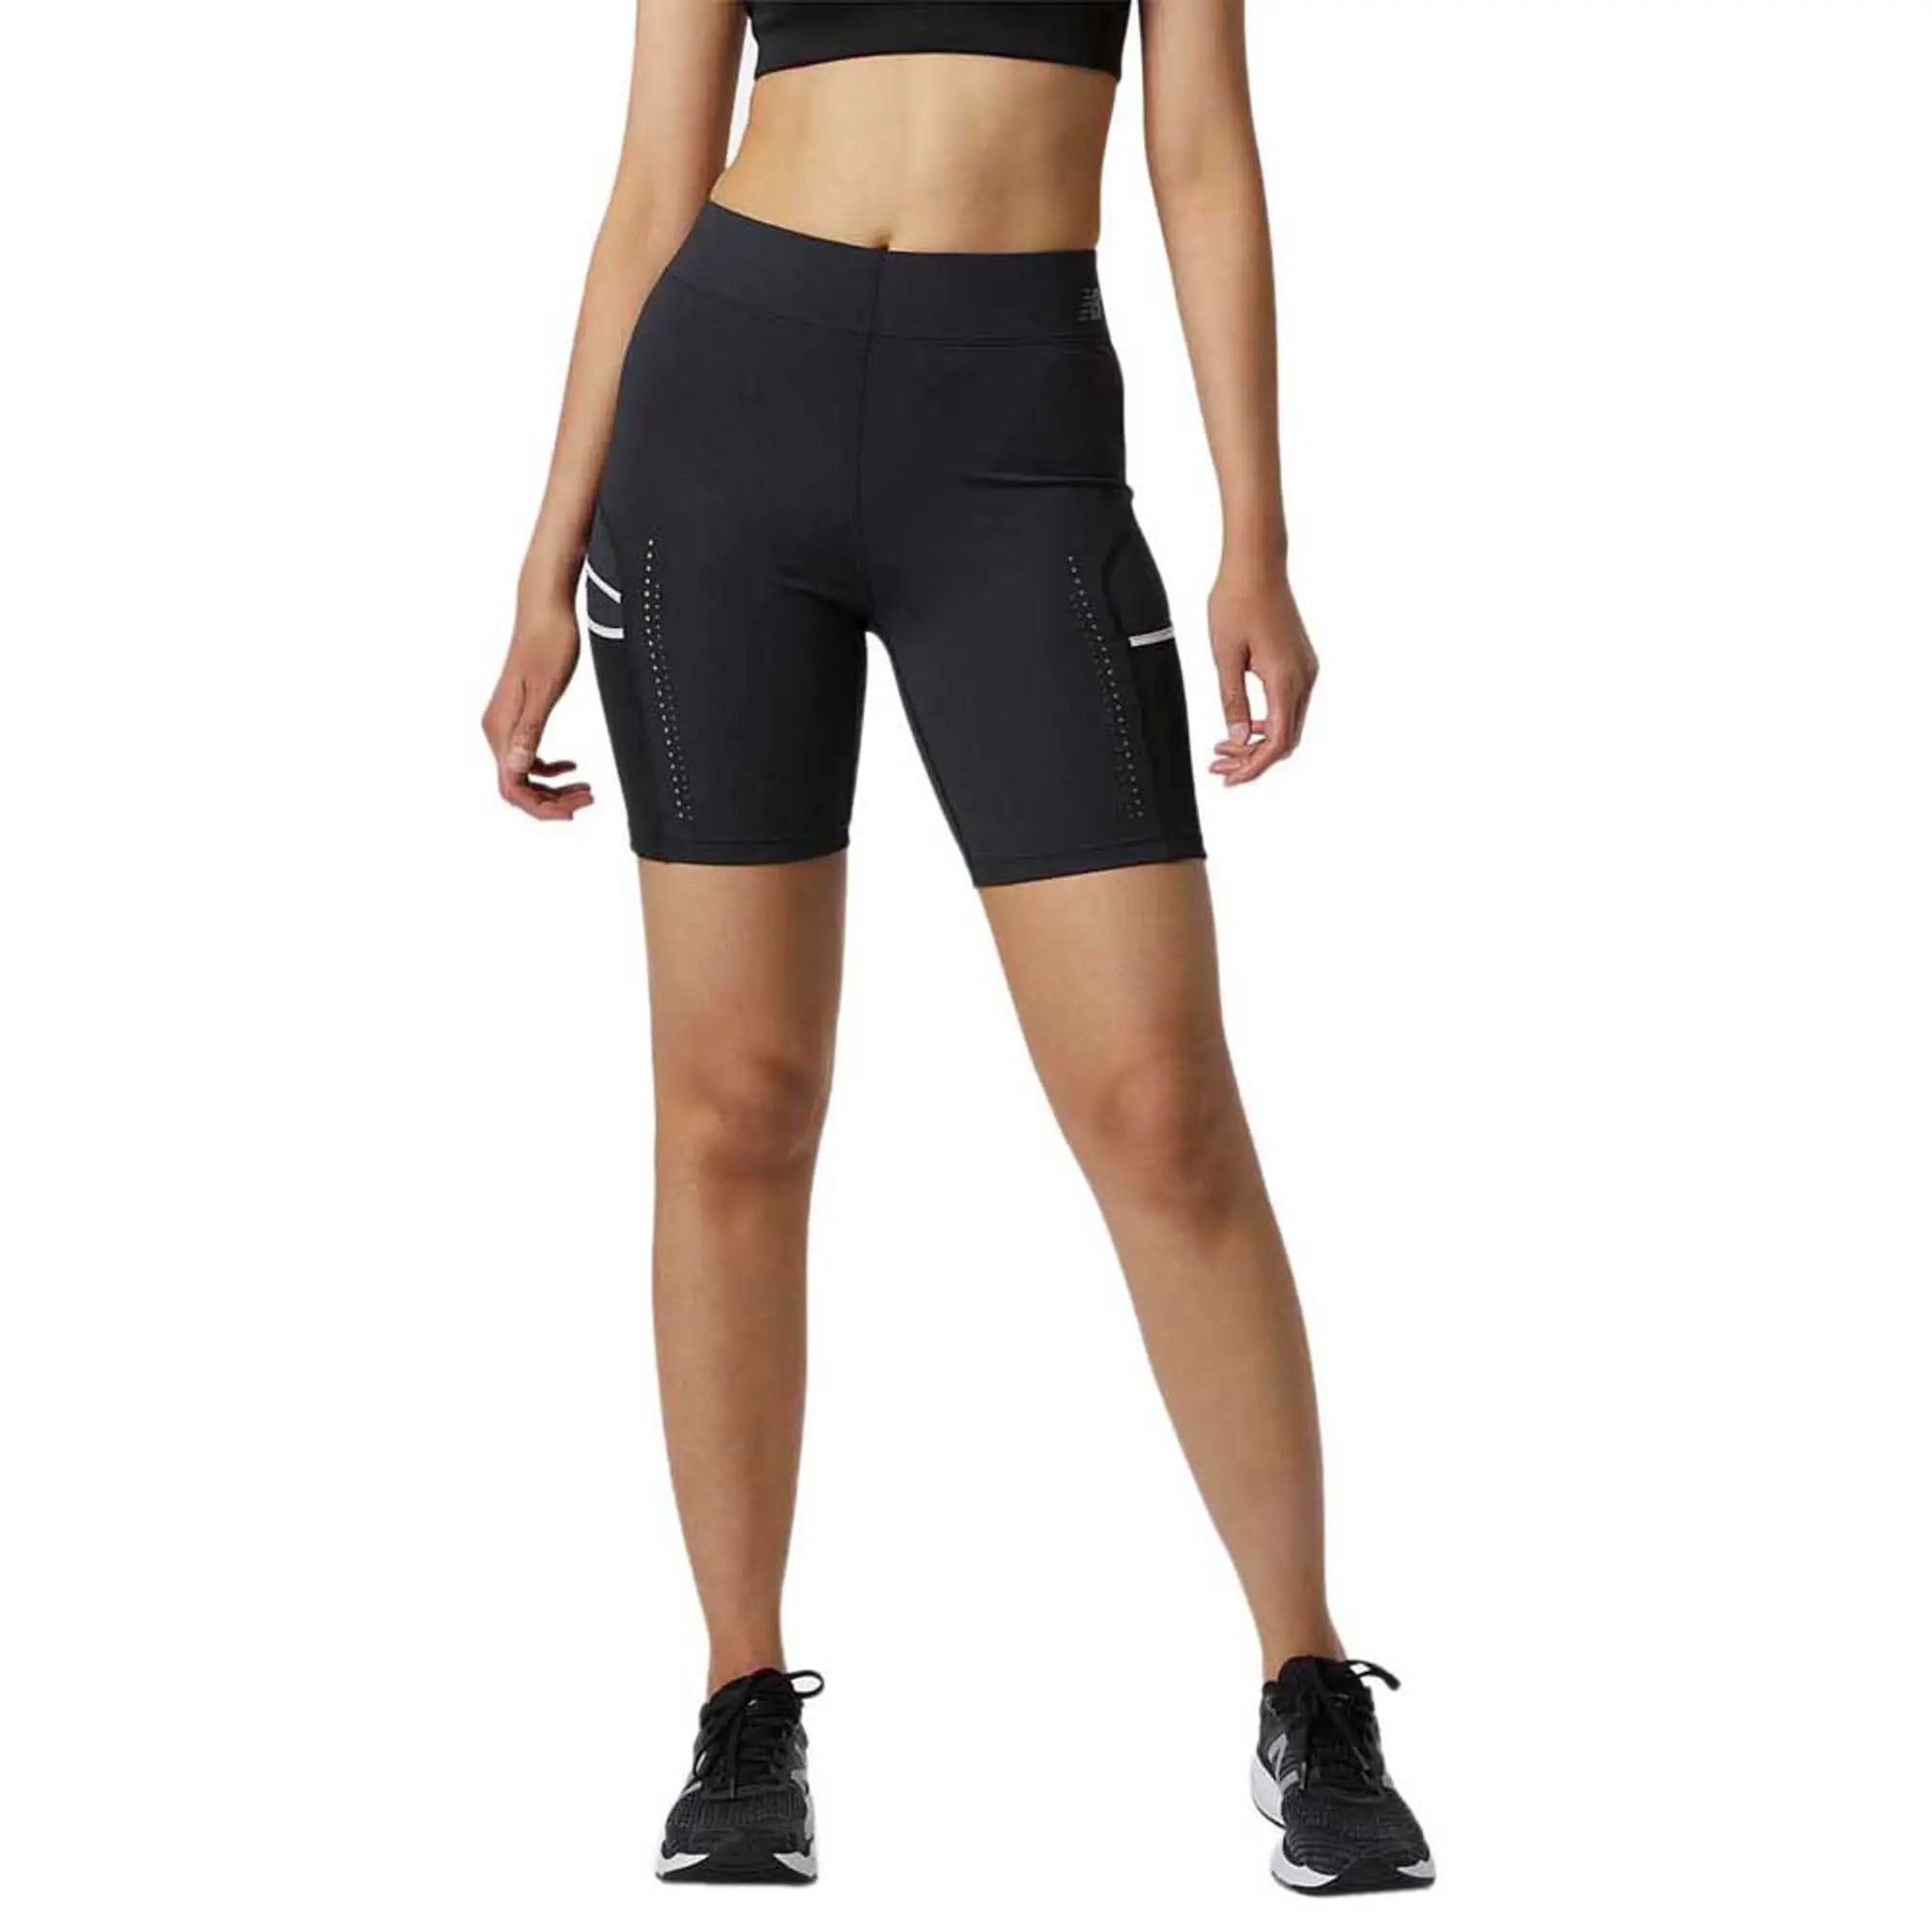 New Balance Women's Q Speed Utility Fitted Short in Black/Noir Poly Knit